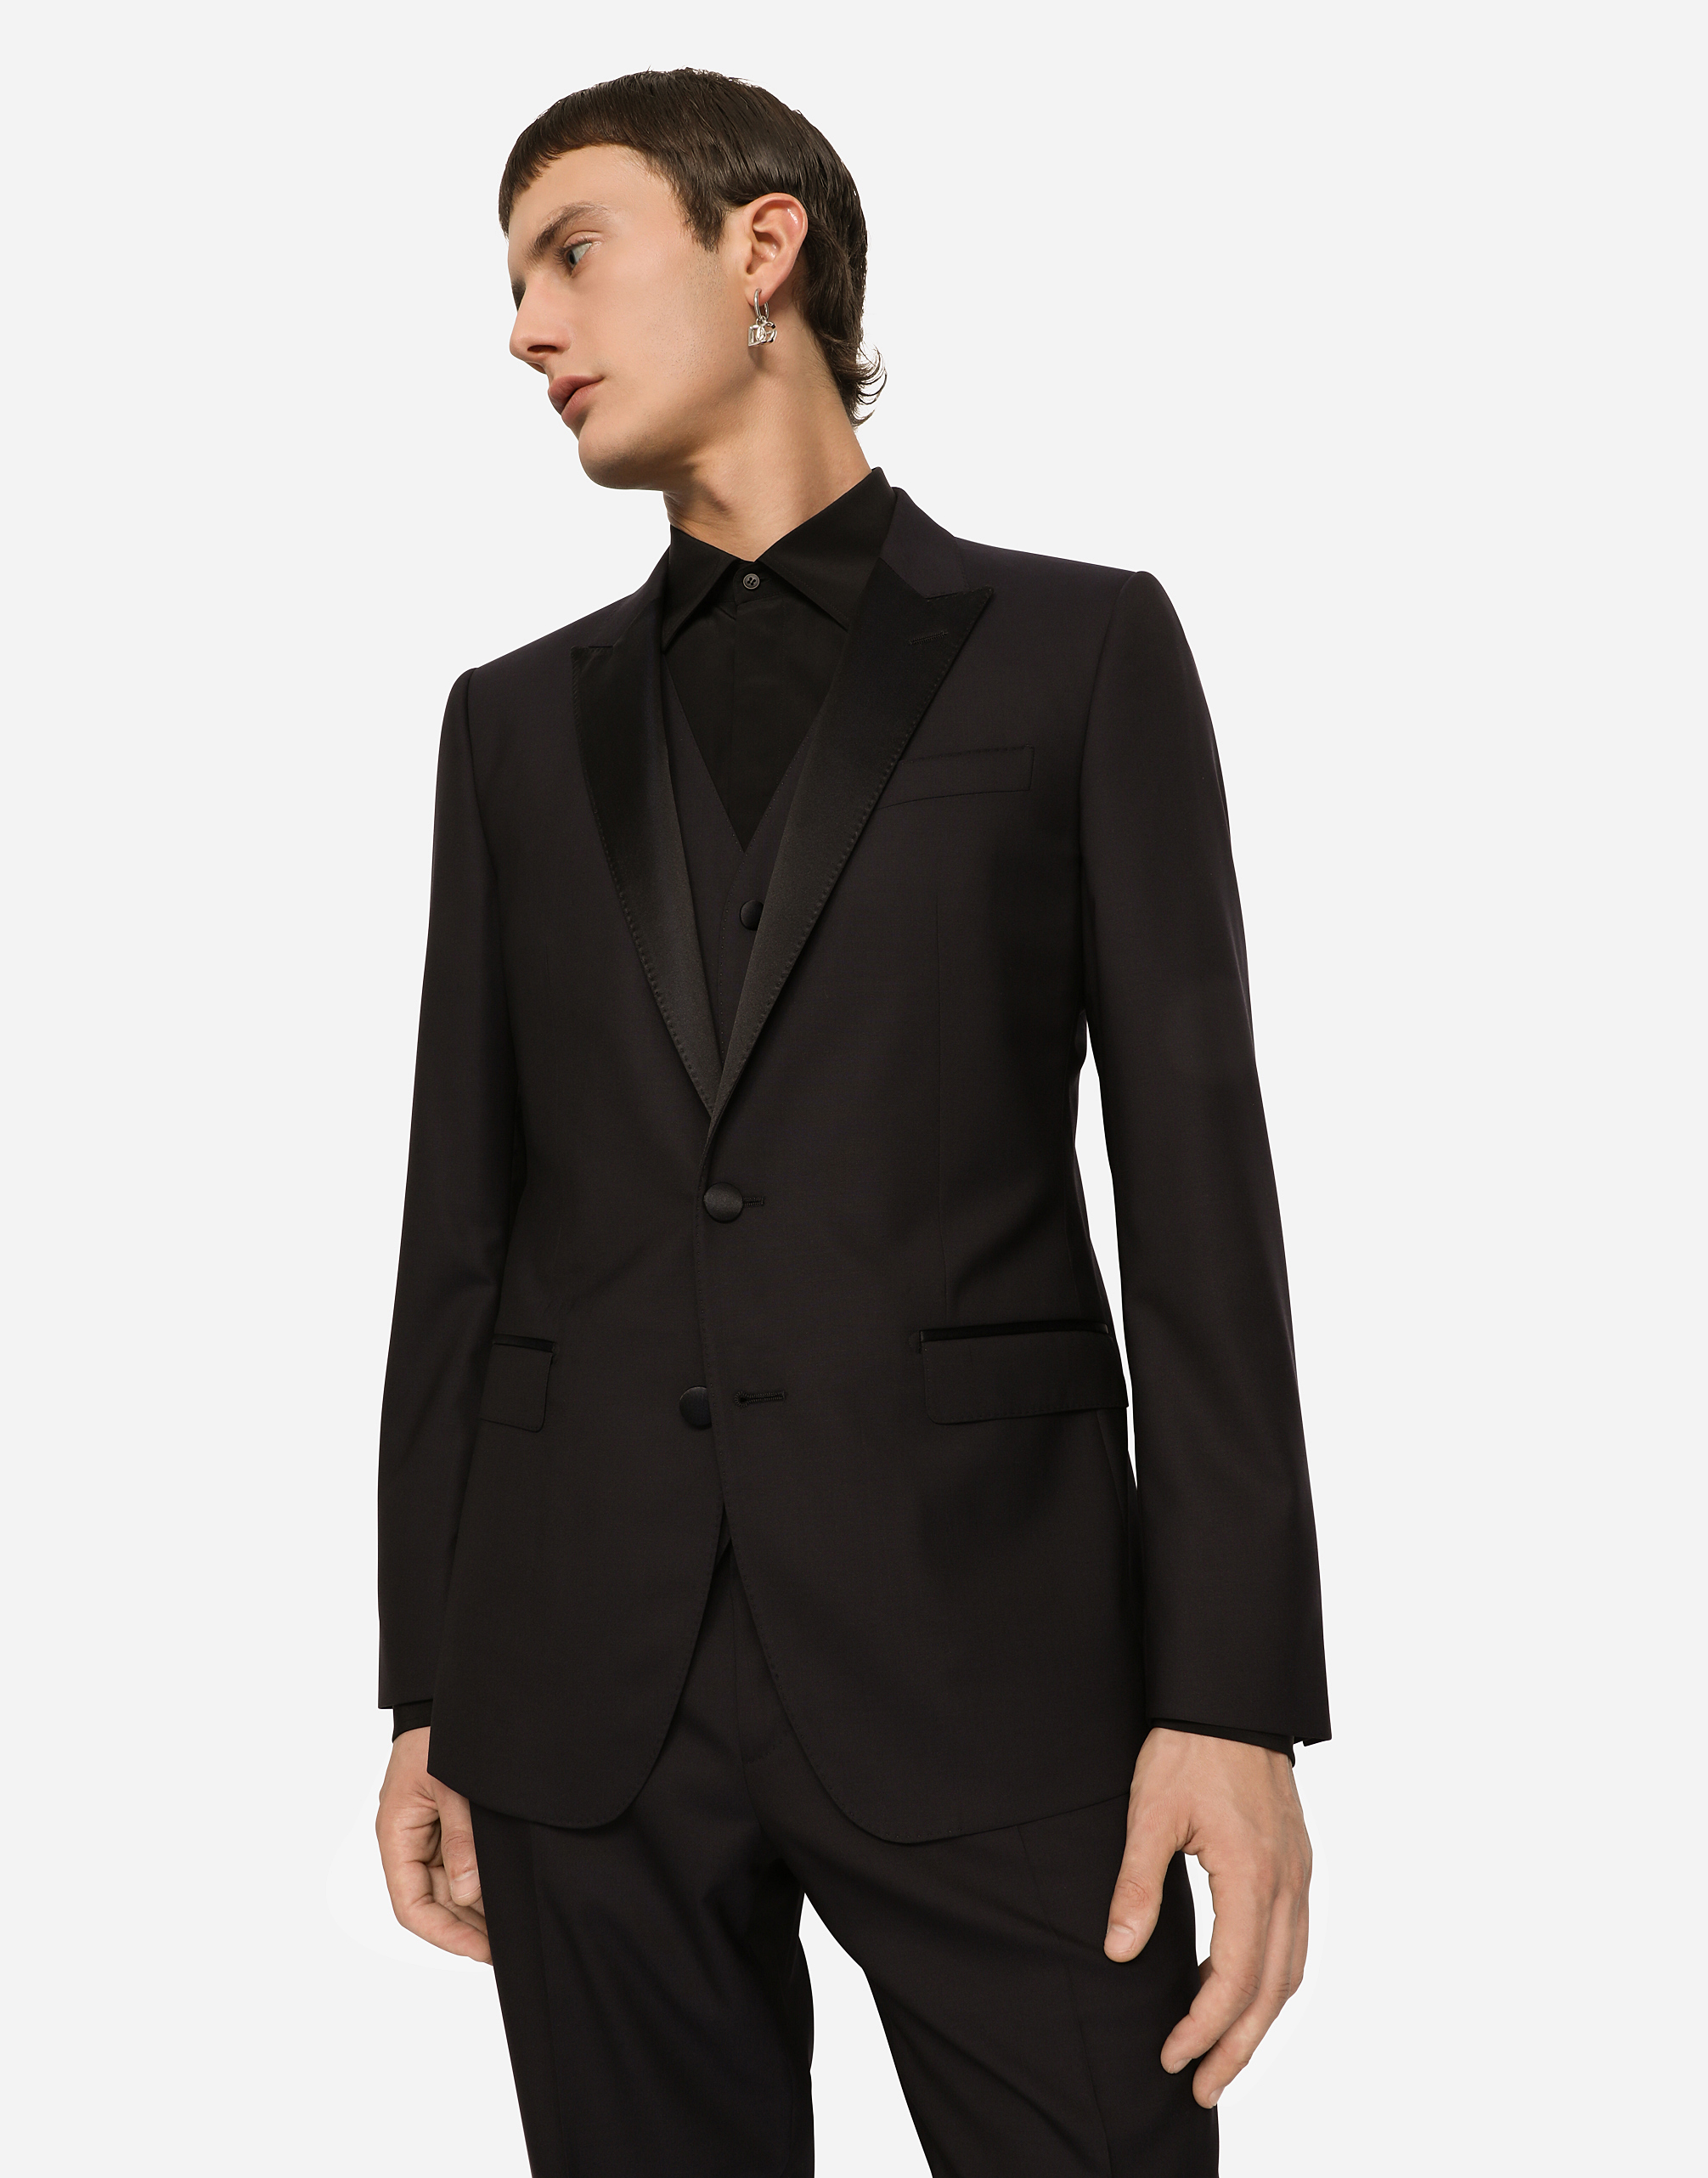 Save 28% Dolce & Gabbana Silk Martini Fit 3-piece Tuxedo Suit in Black for Men Mens Clothing Suits Two-piece suits 